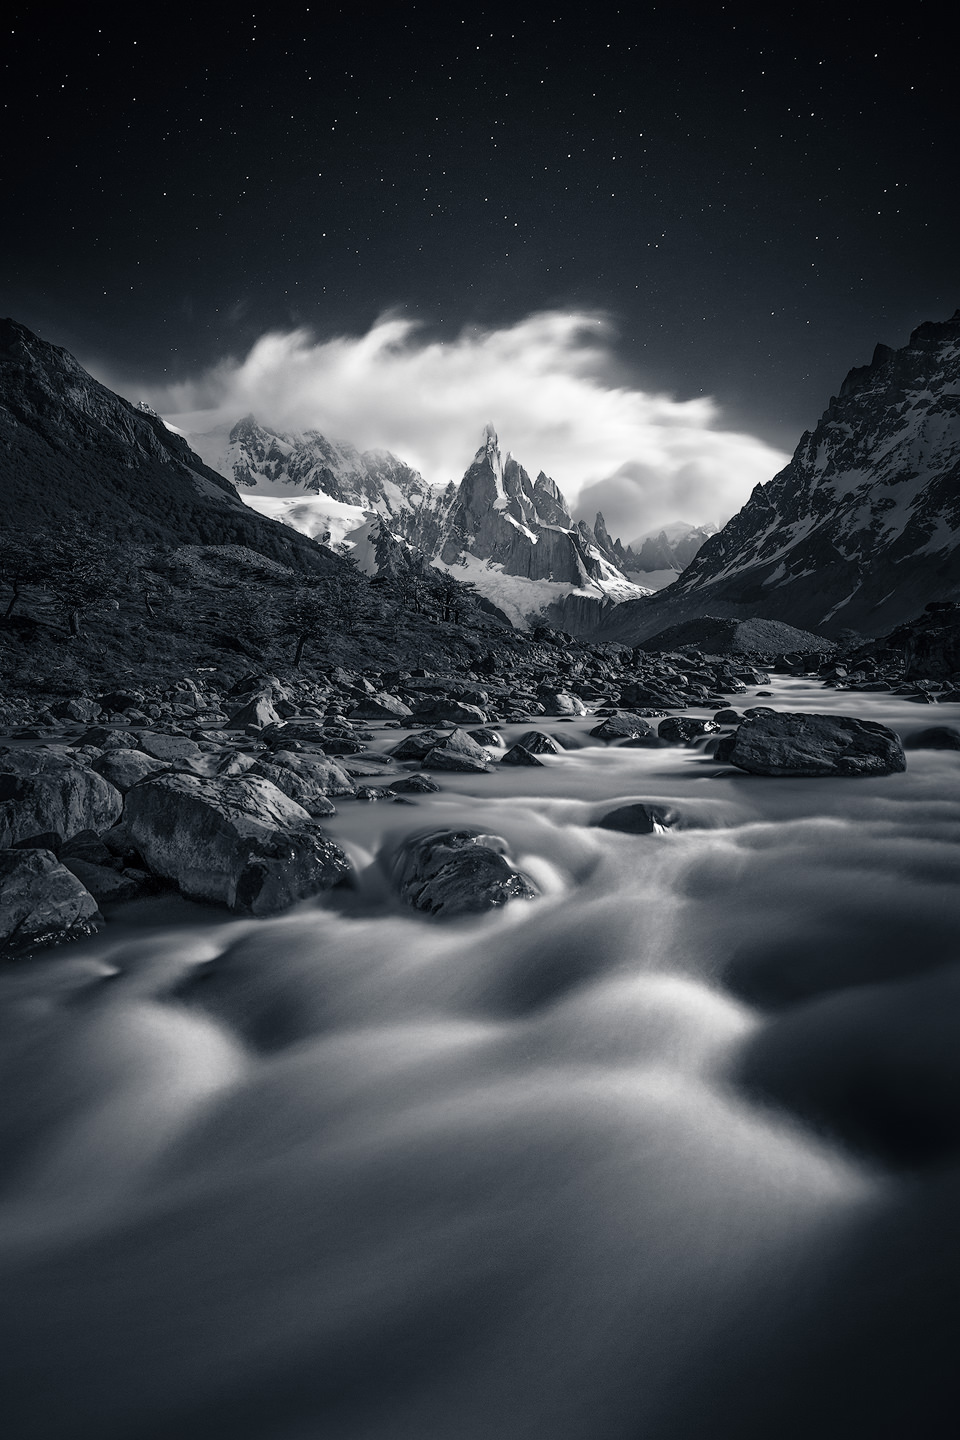 Stars and moonlight above Cerro Torre, Patagonia.